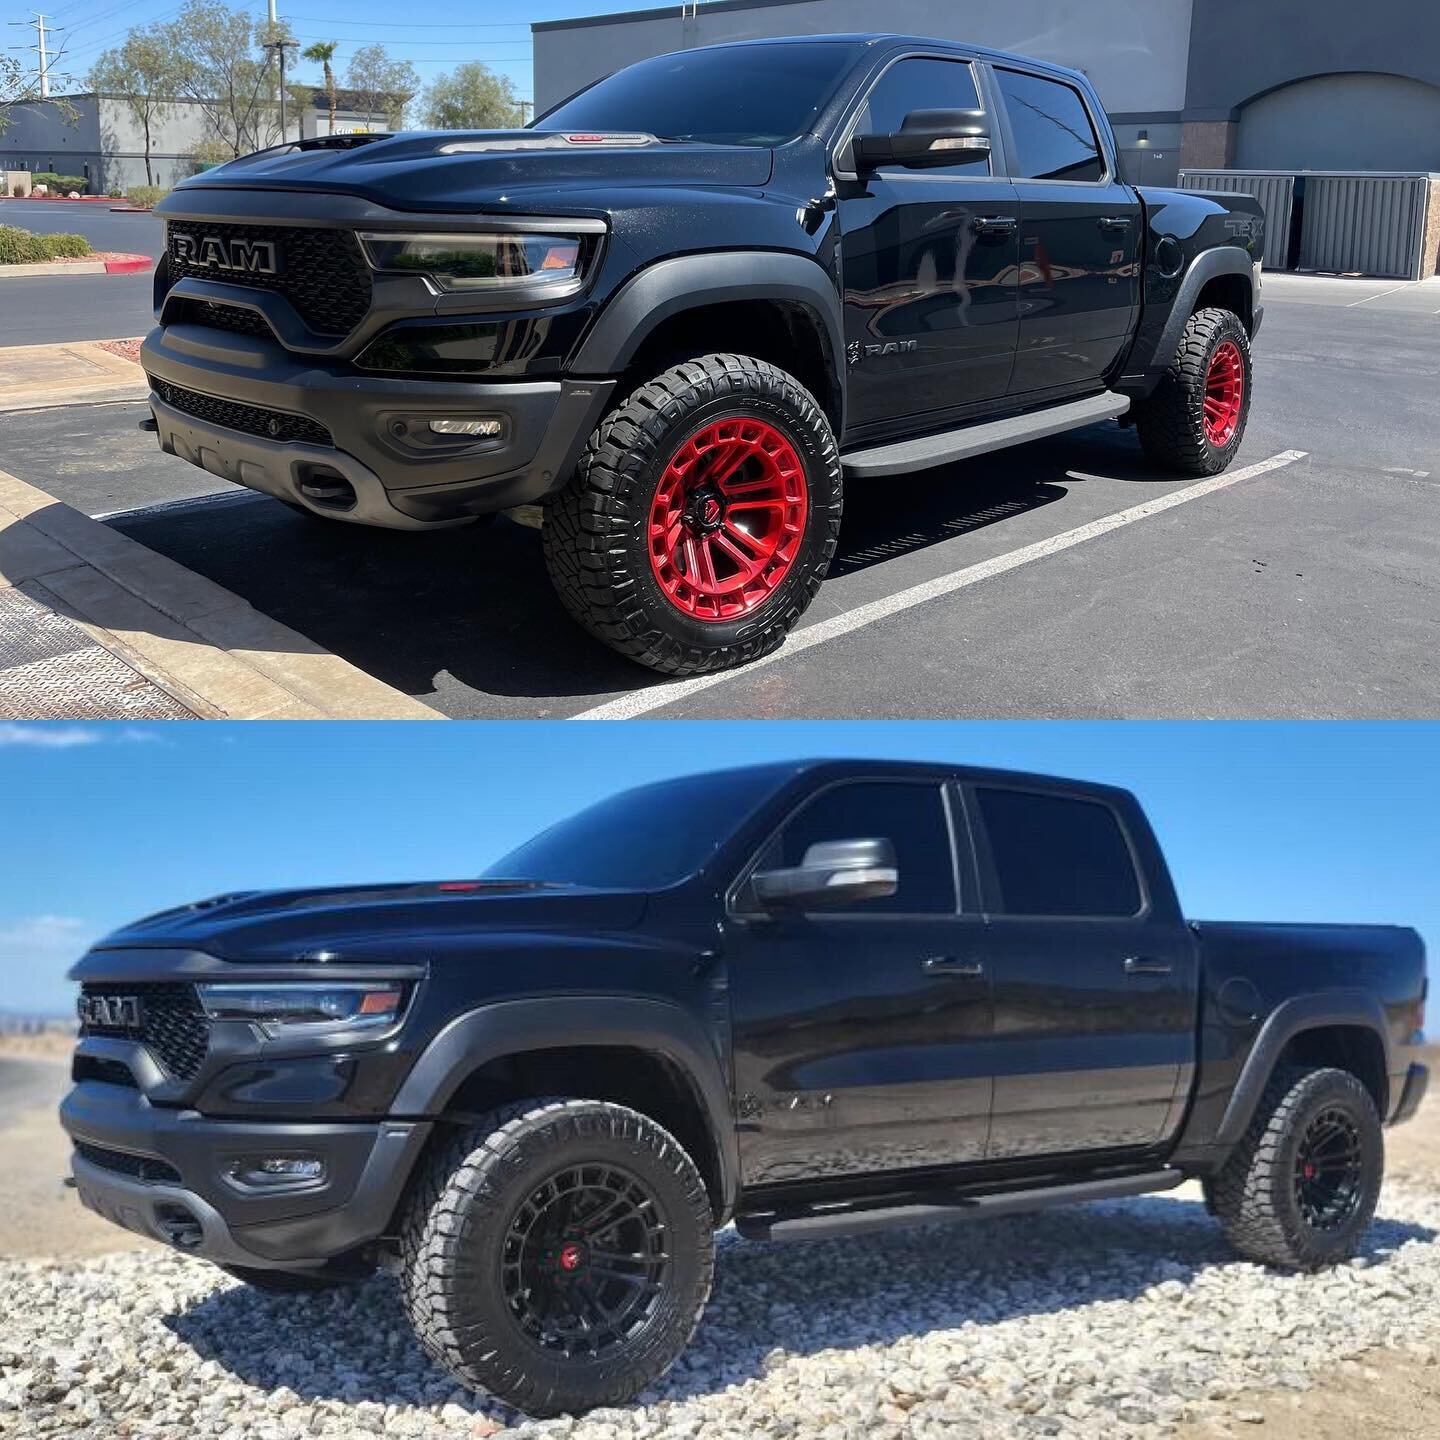 Before ⬇️ After
Powder coated rims satin black on this Ram TRX 🔥🔥